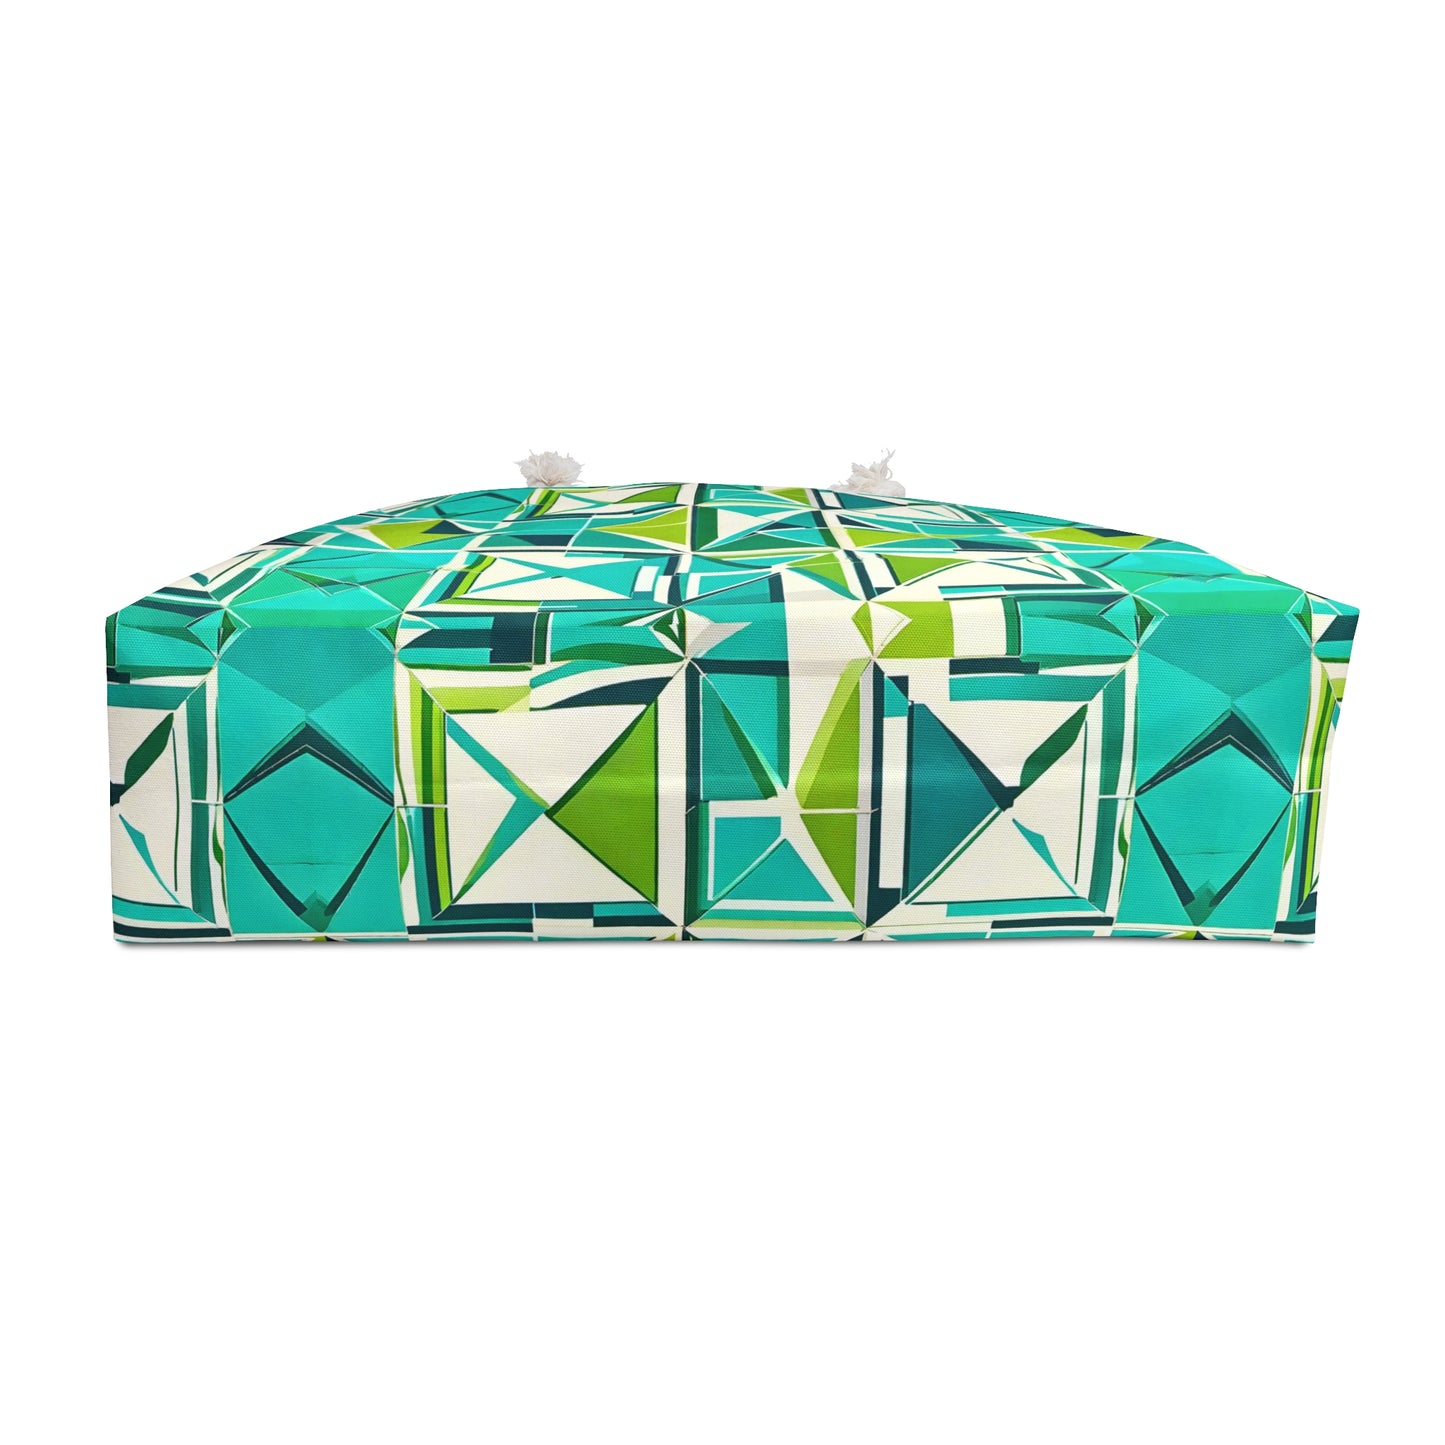 Midcentury Modern Cancun Vacation Tile Turquoise and Green Geometric Pattern Shopper Travel Market Beach Weekender Bag